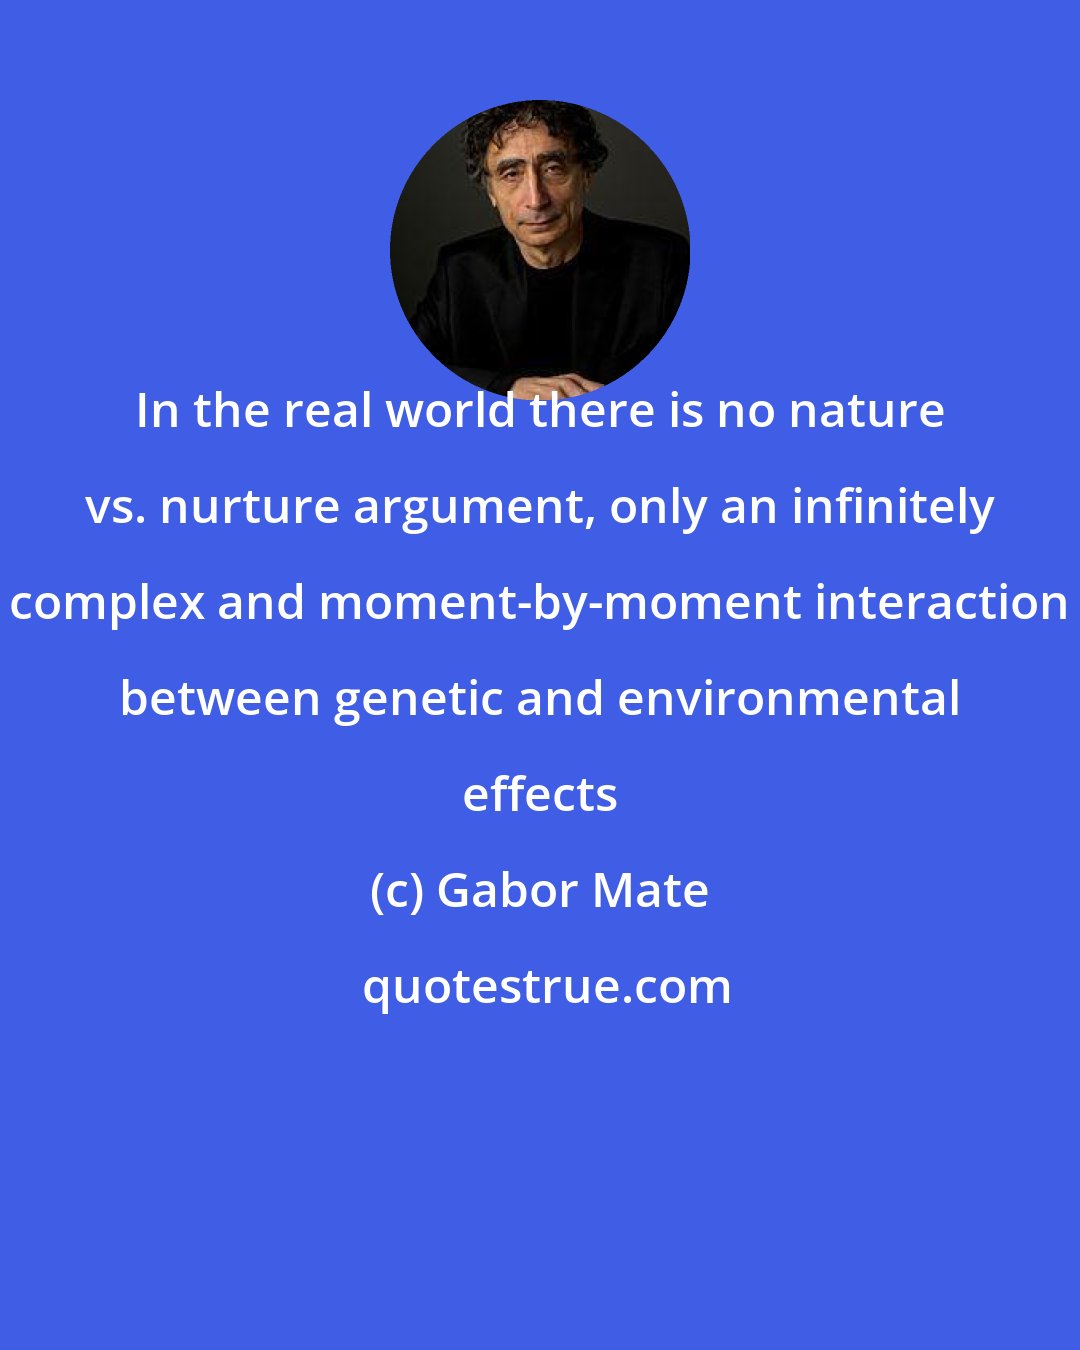 Gabor Mate: In the real world there is no nature vs. nurture argument, only an infinitely complex and moment-by-moment interaction between genetic and environmental effects